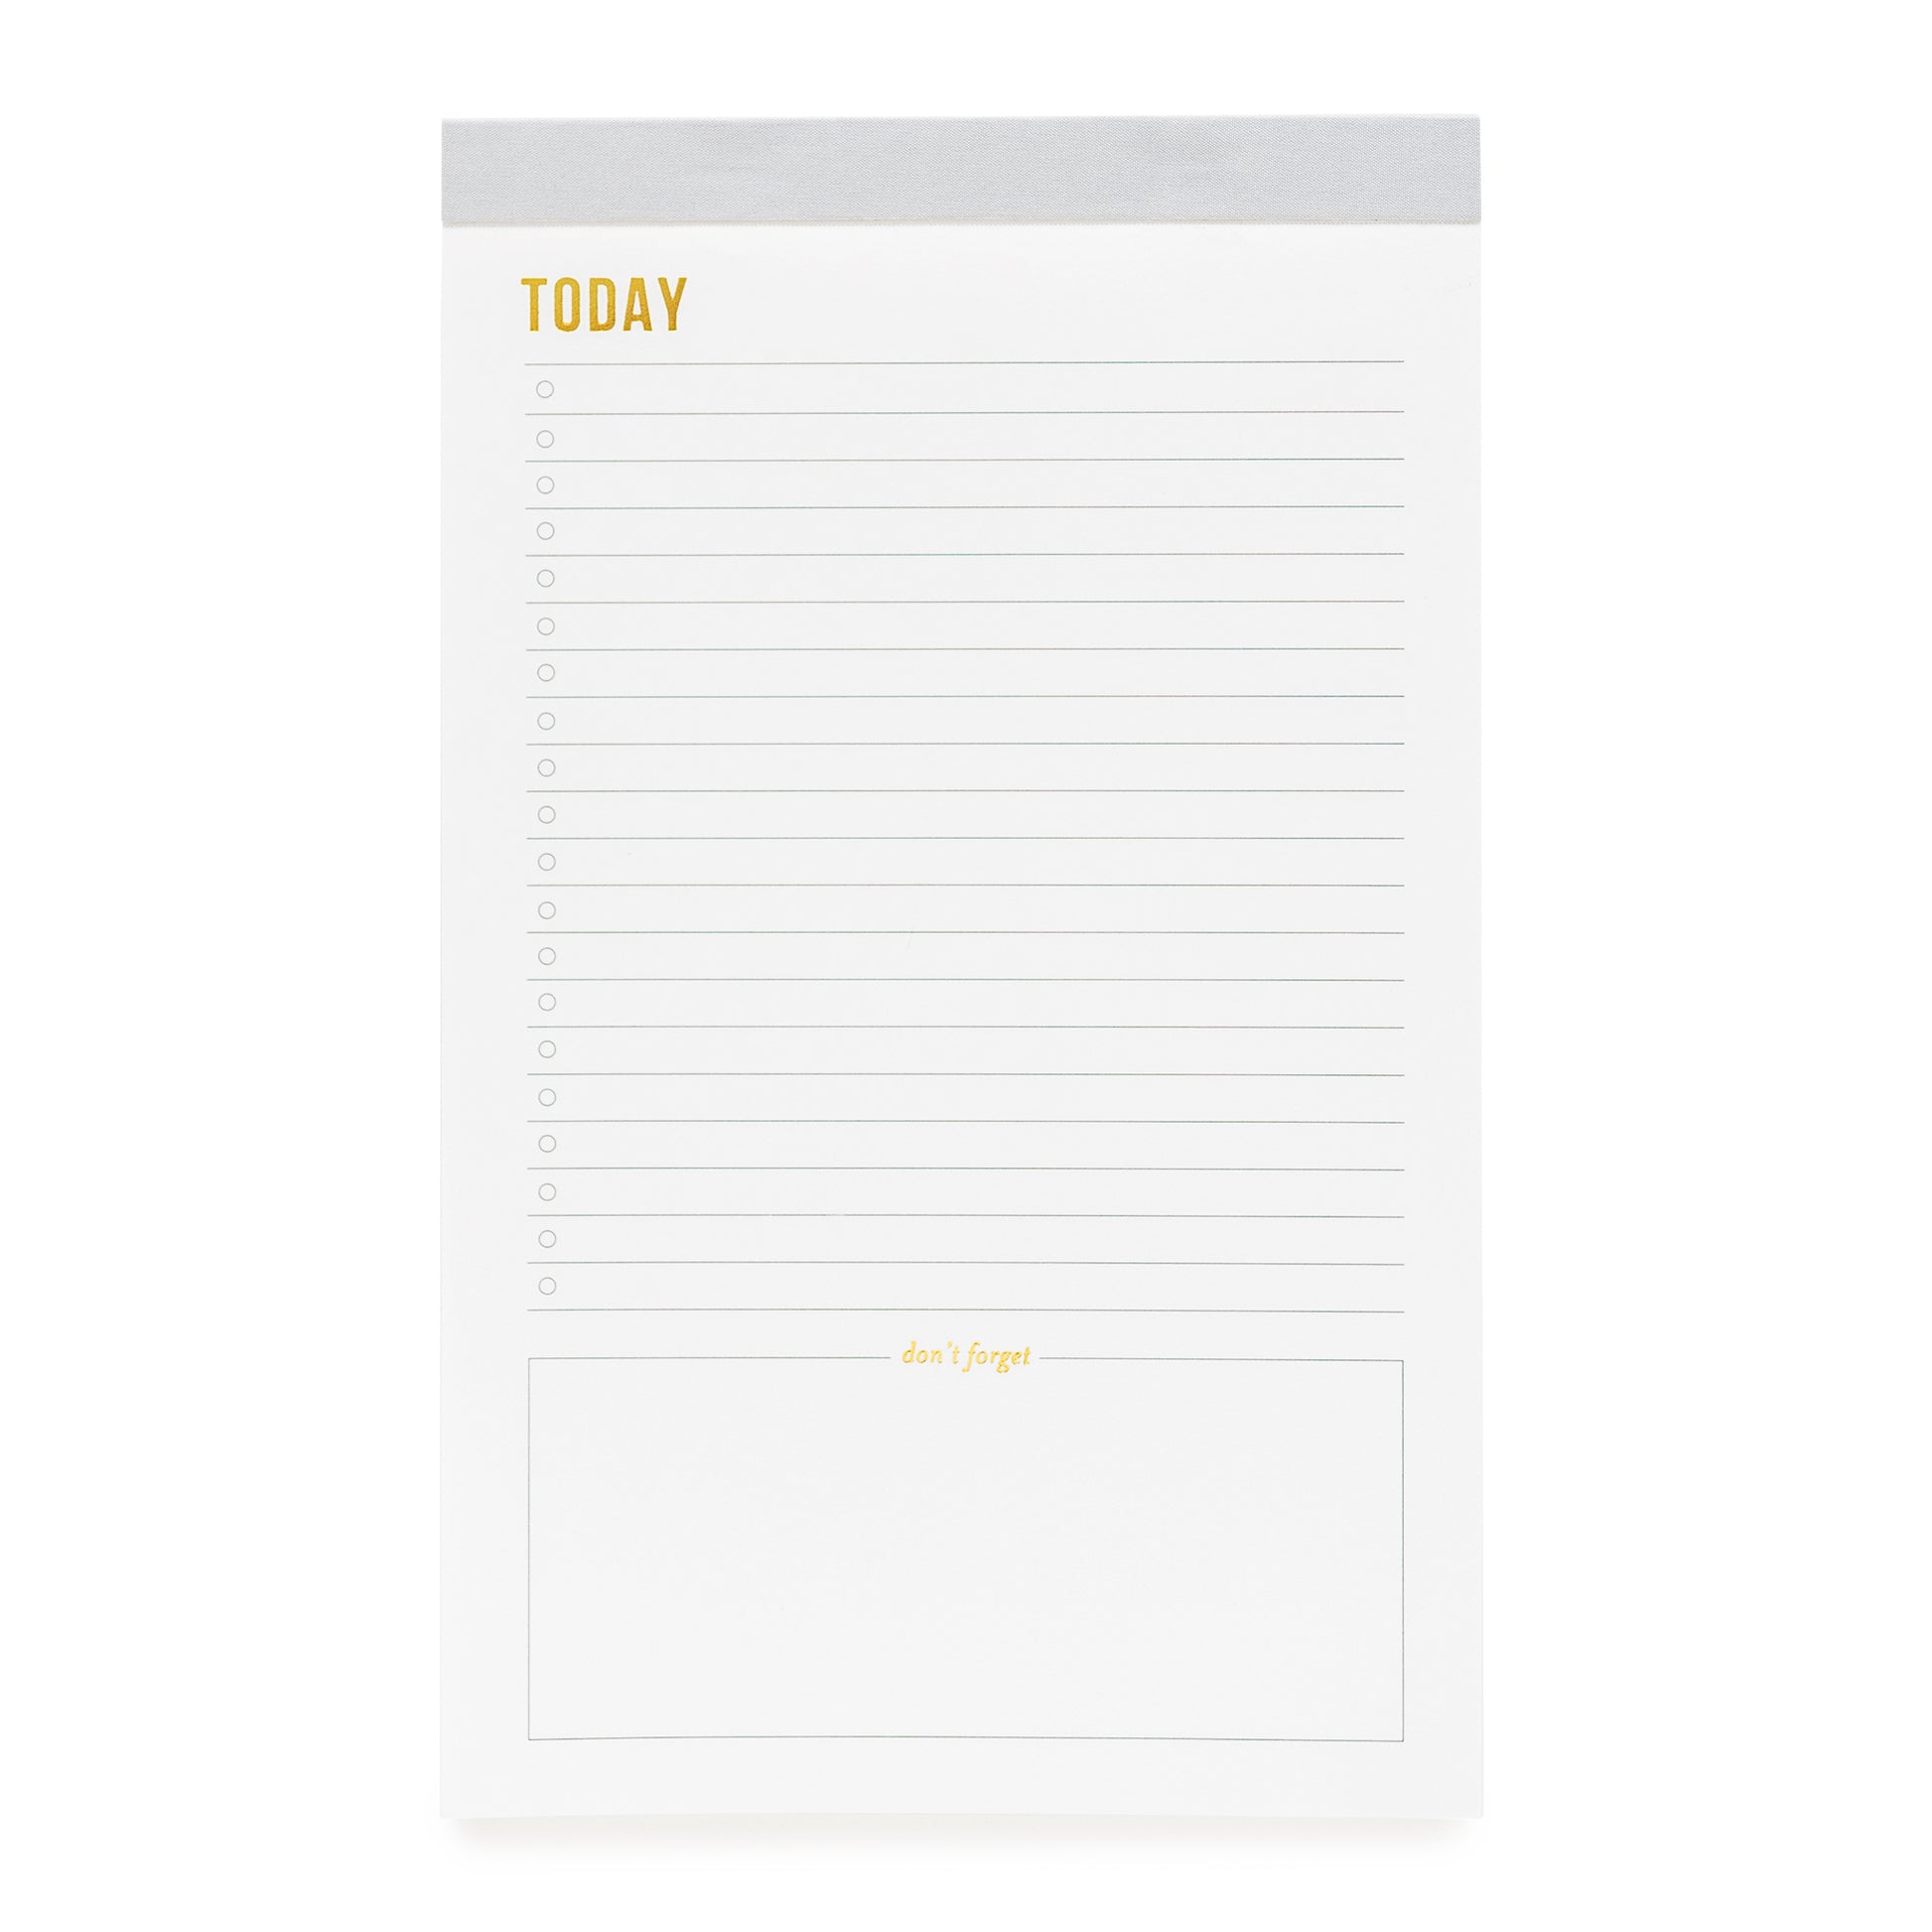 Today notepad with grey binding and gold foil details.